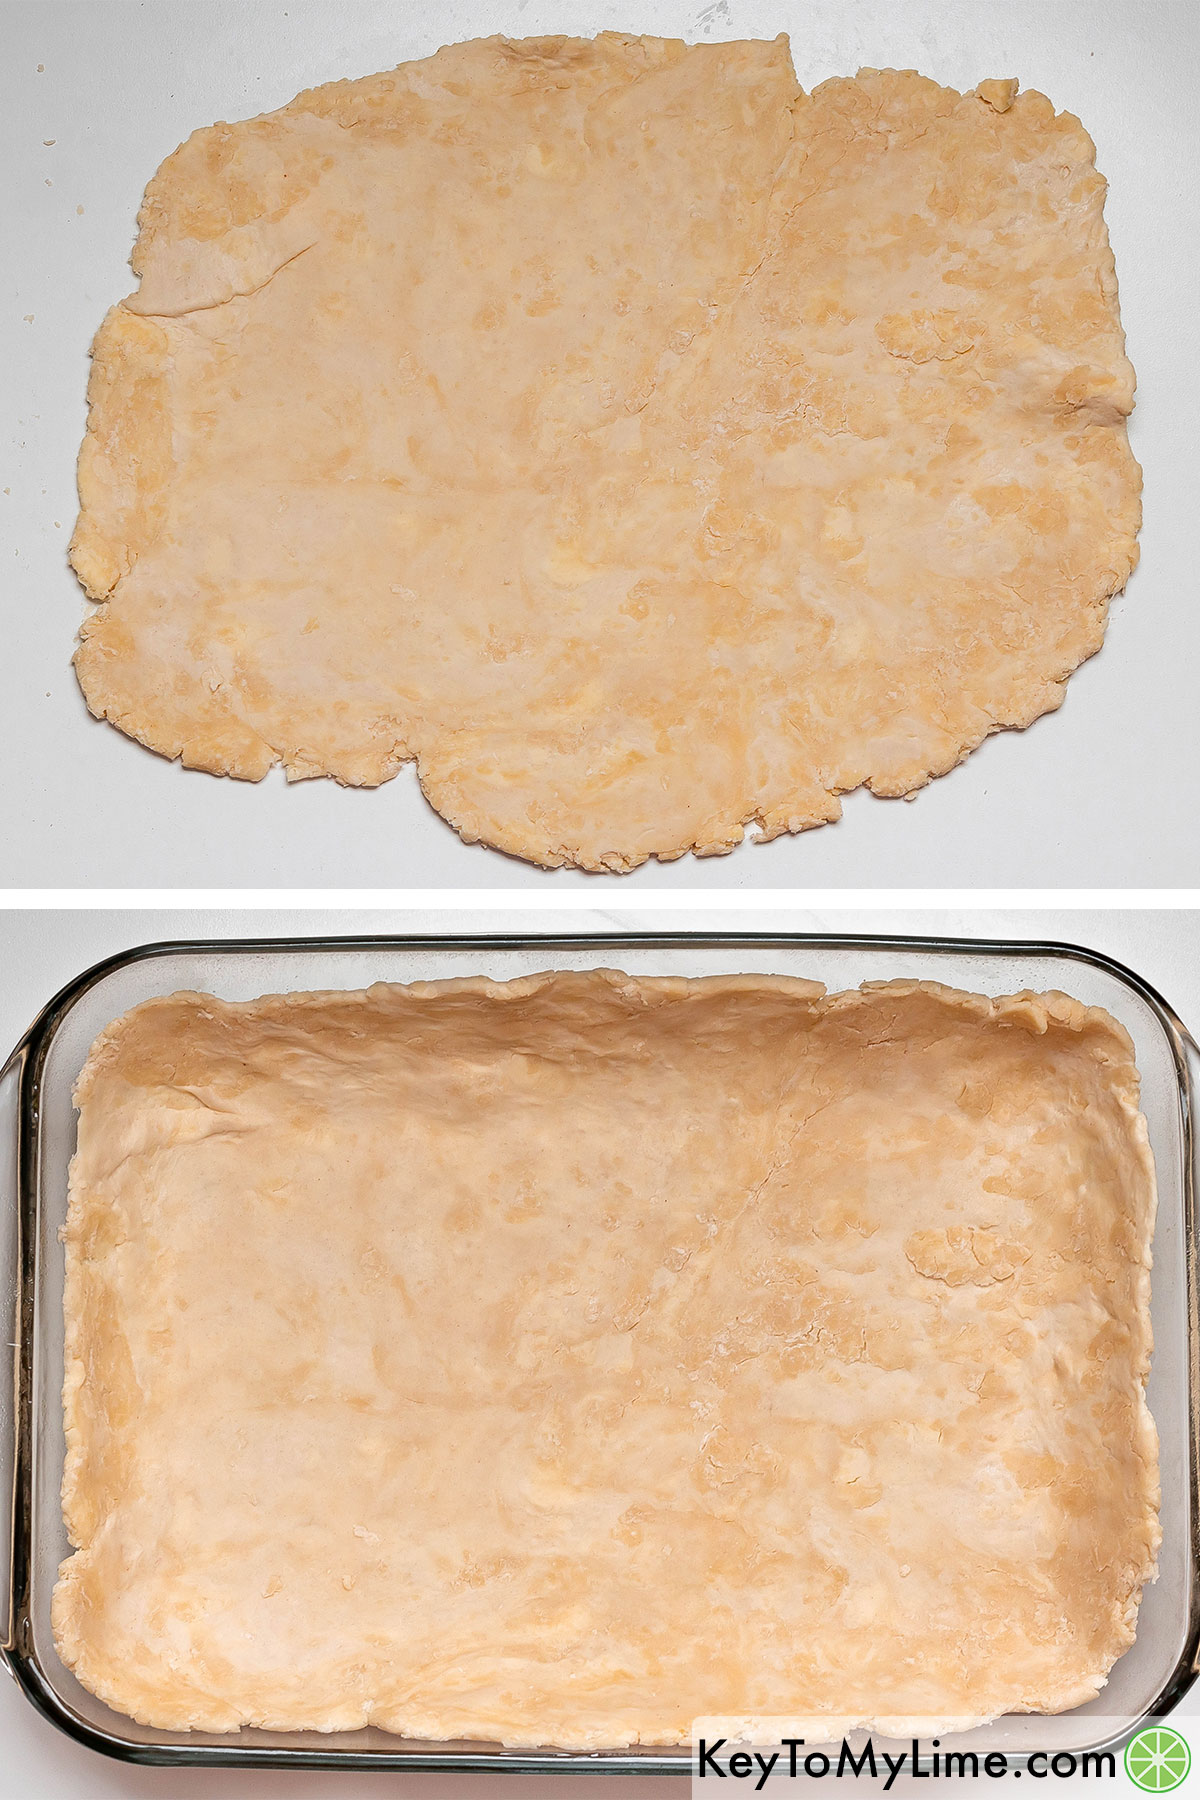 Rolling the chilled dough out then placing the crust in a greased casserole dish.